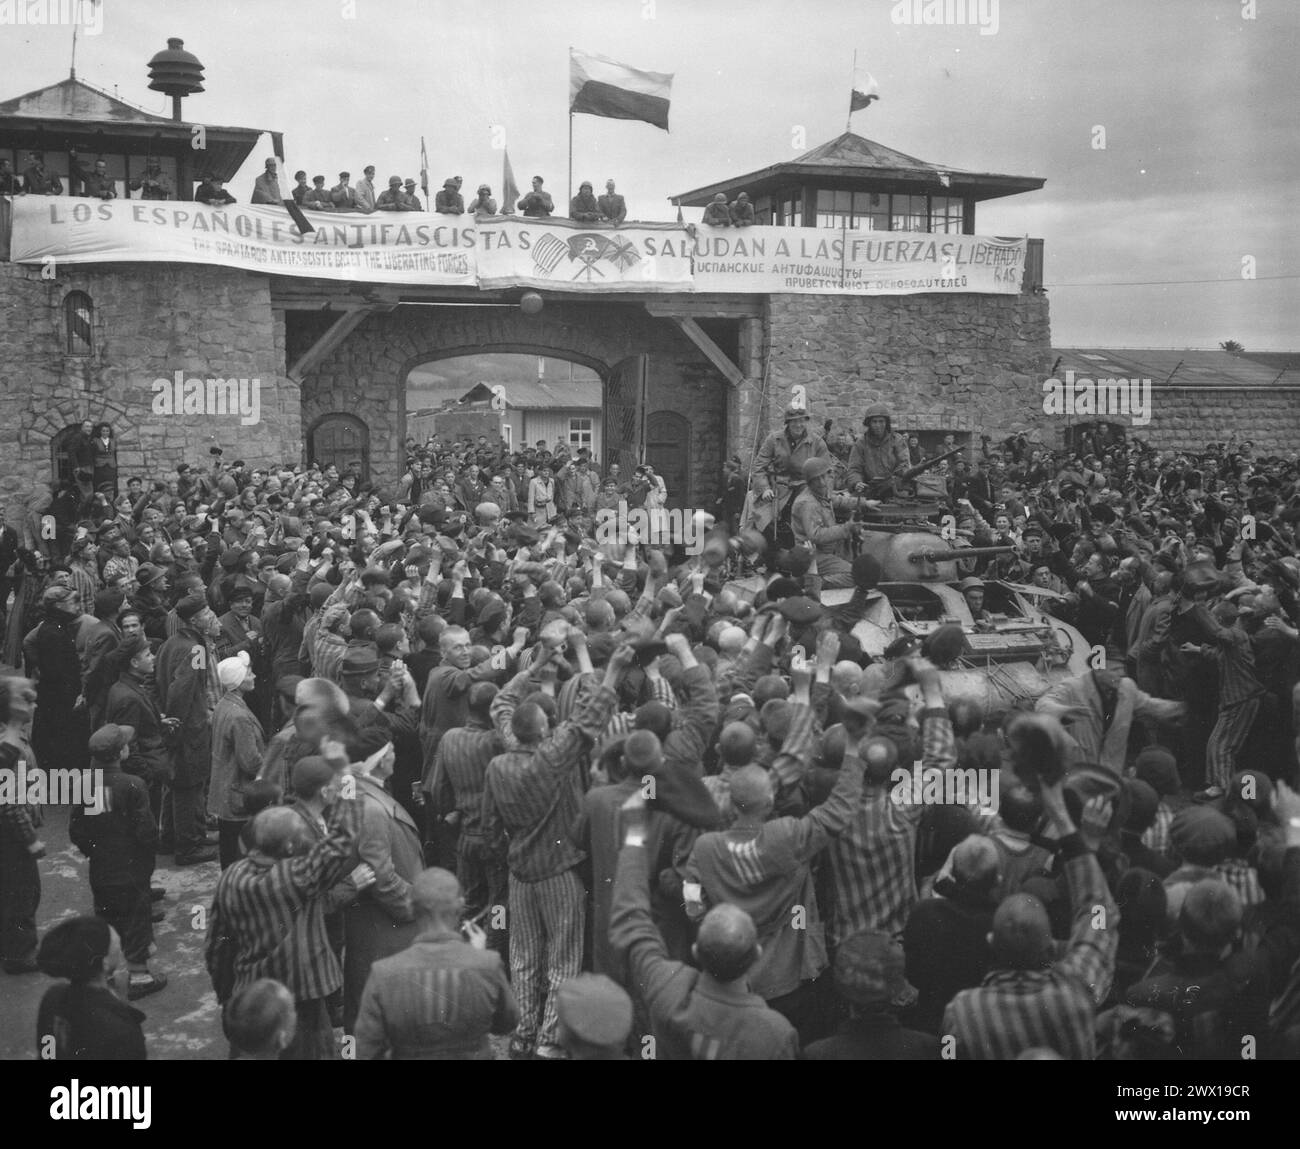 Liberated prisoners in the Mauthausen concentration camp near Linz, Austria, give rousing welcome to Cavalrymen of the 11th Armored Division. The banner across the wall was made by Spanish Loyalist prisoners ca. May 6, 1945 Stock Photo